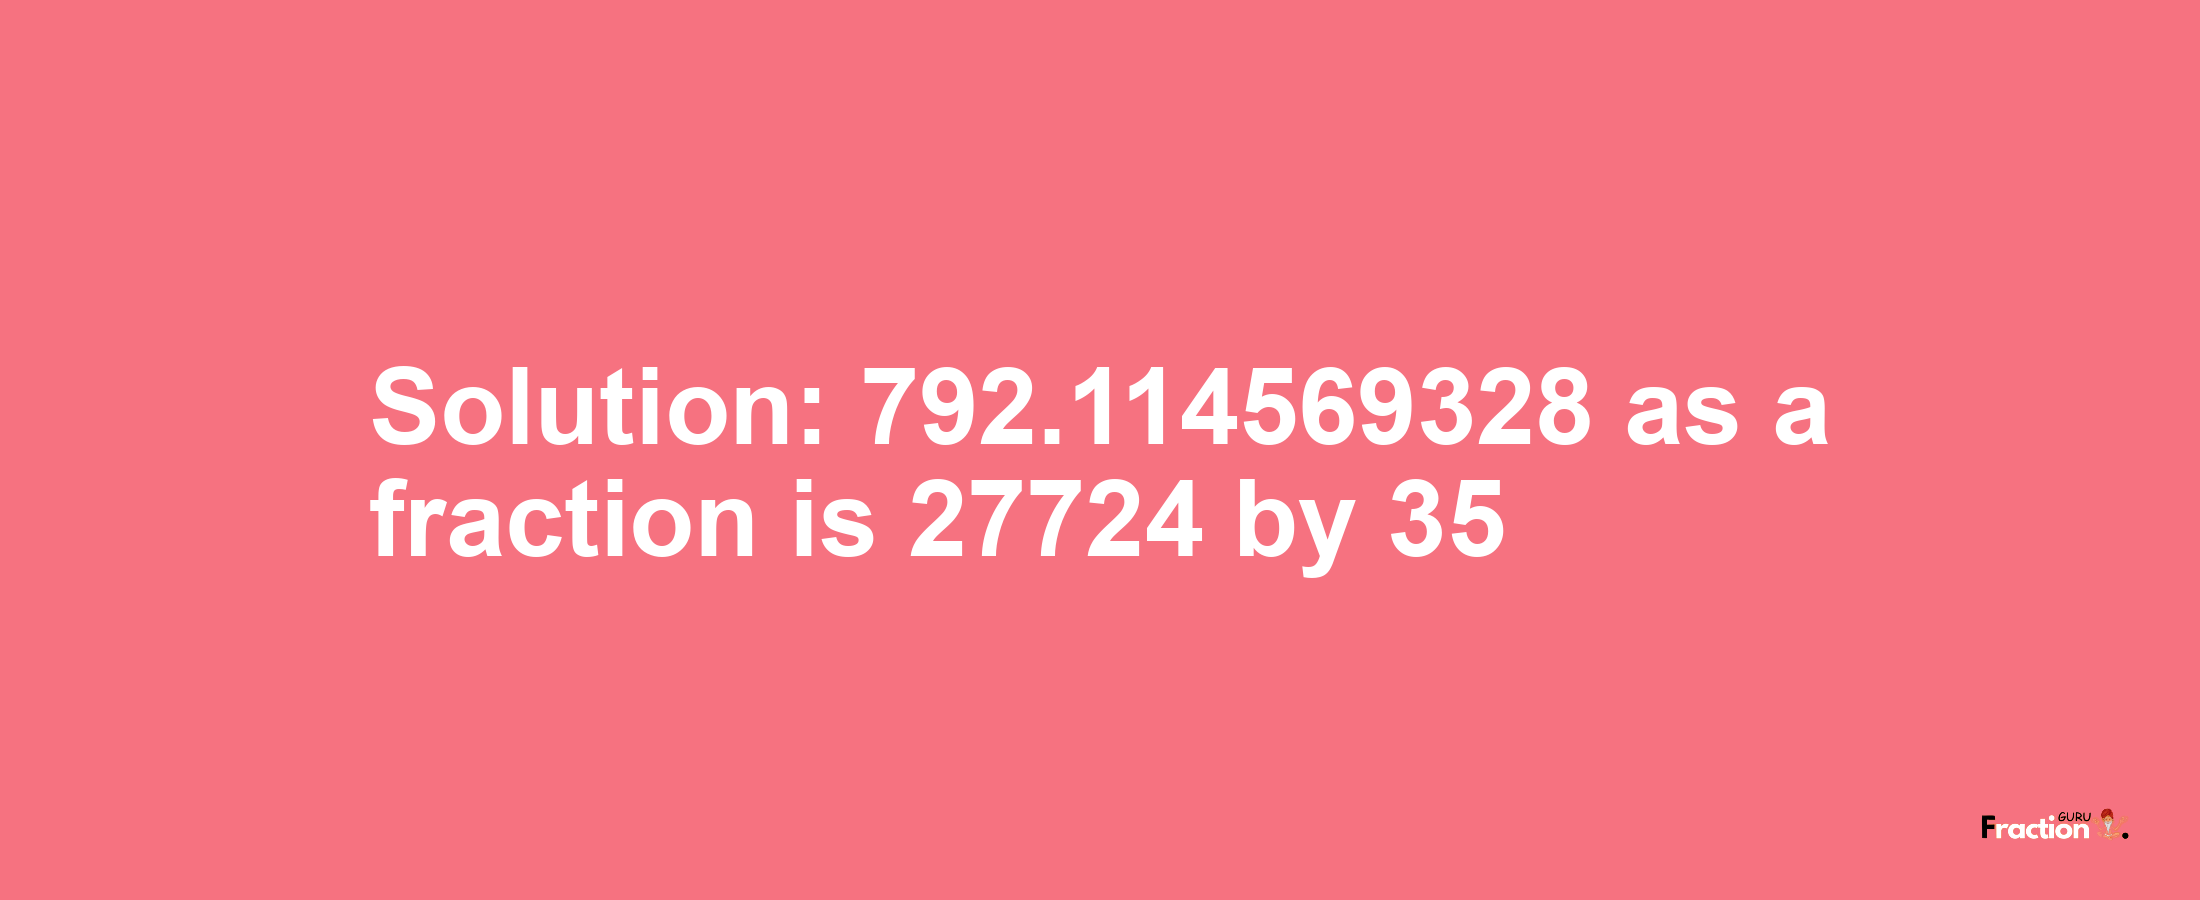 Solution:792.114569328 as a fraction is 27724/35